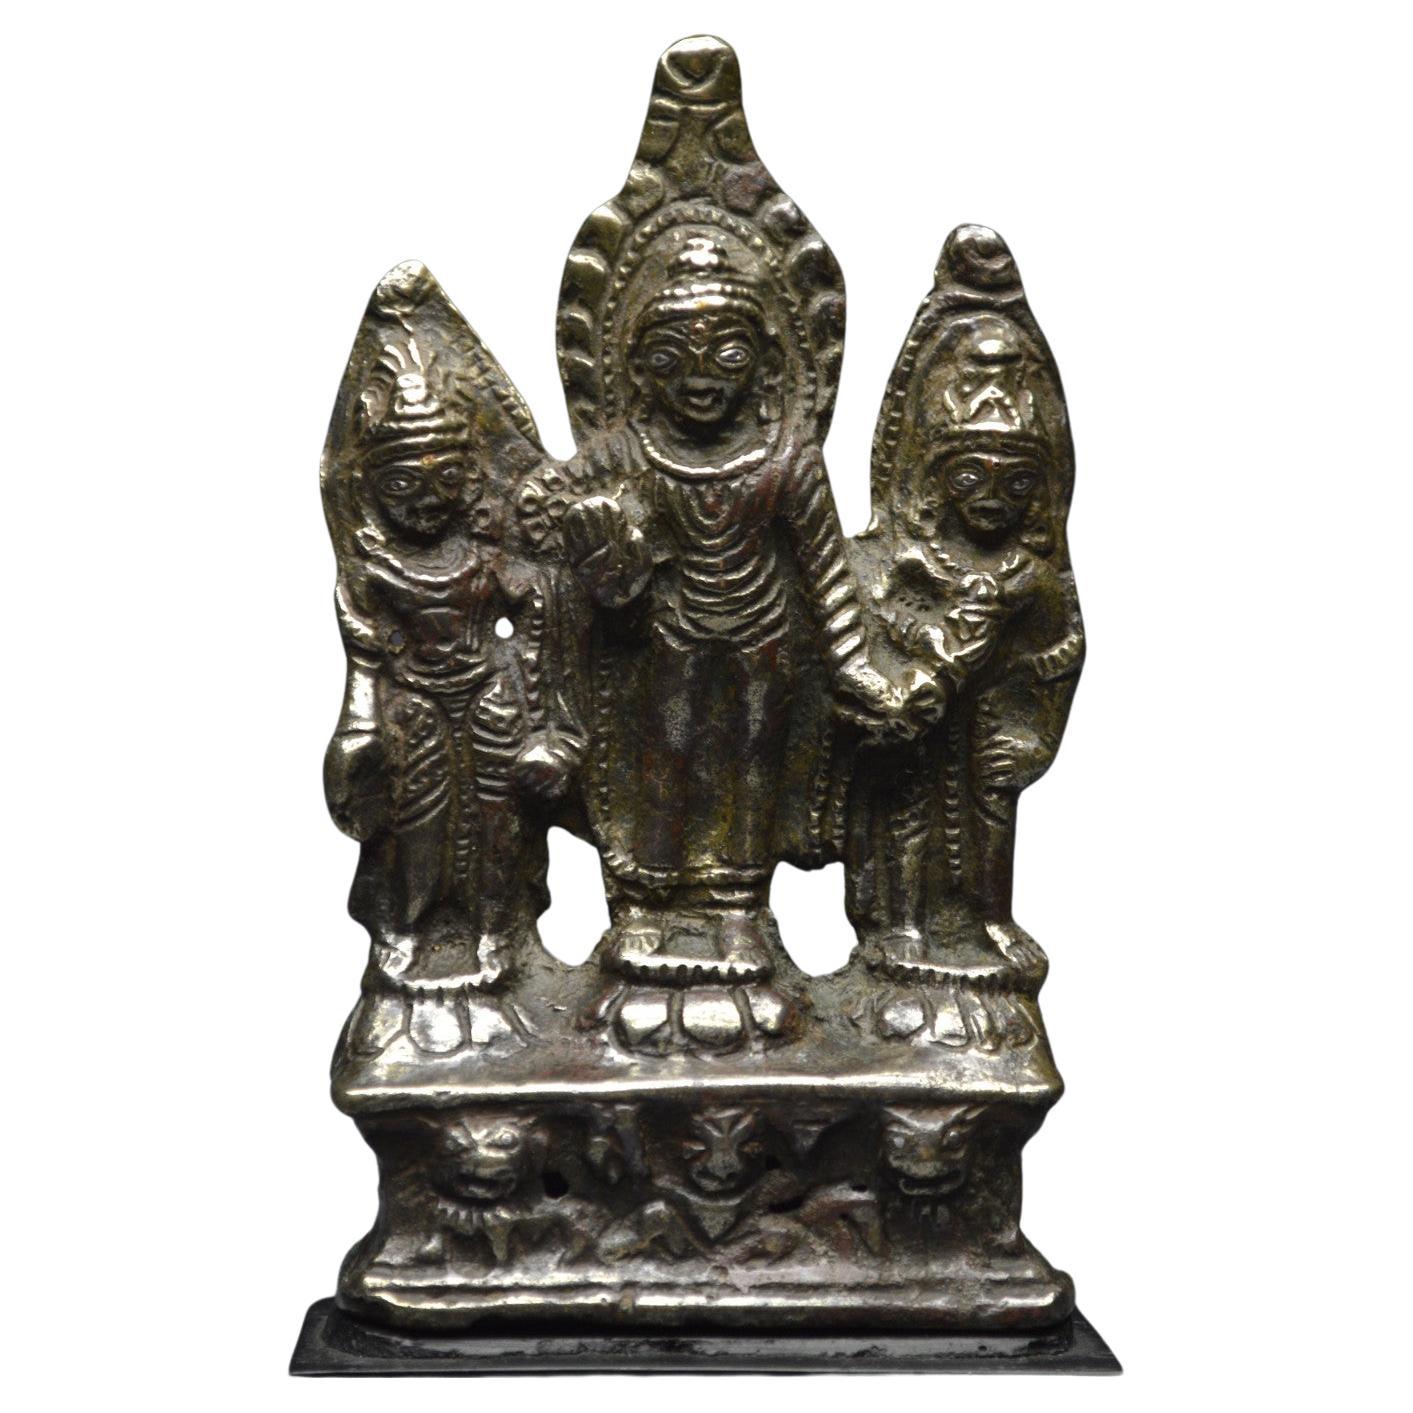 Tibet, 10th-12th Century, Buddha and Bodhisattvas, Copper alloy and silver inlay